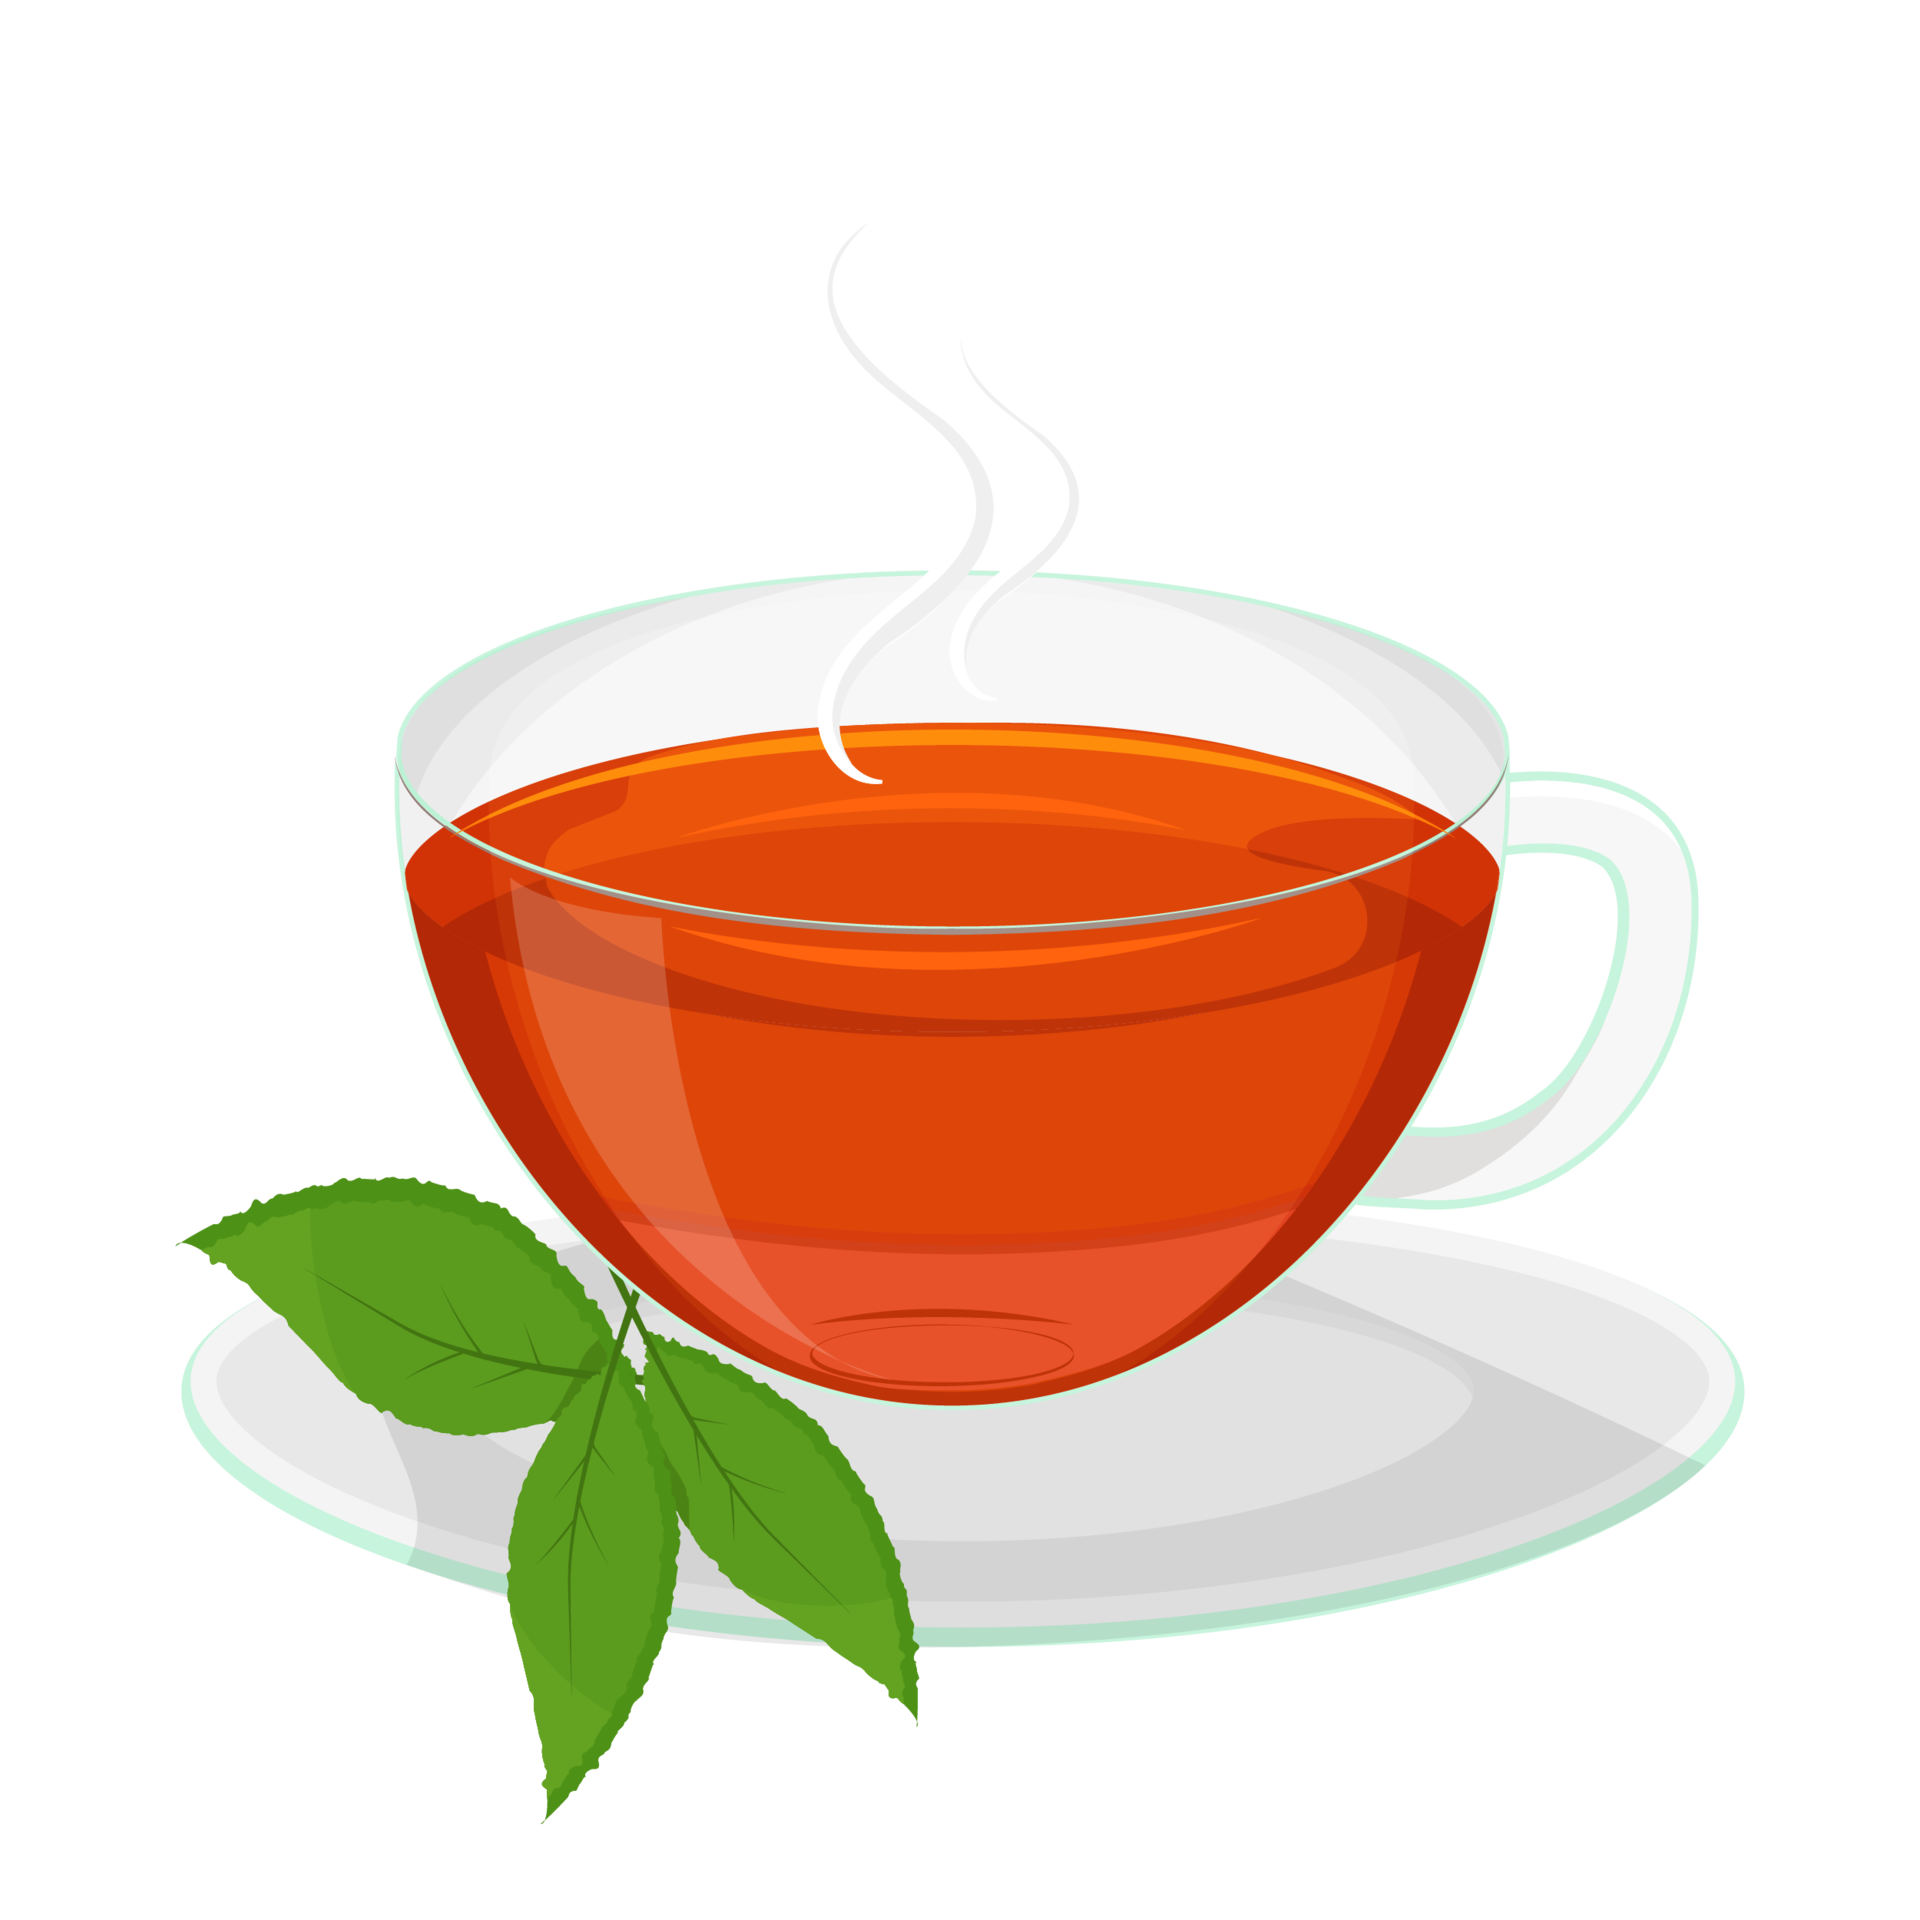 Tea PNG Free Images with Transparent Background - (2,565 Free Downloads)